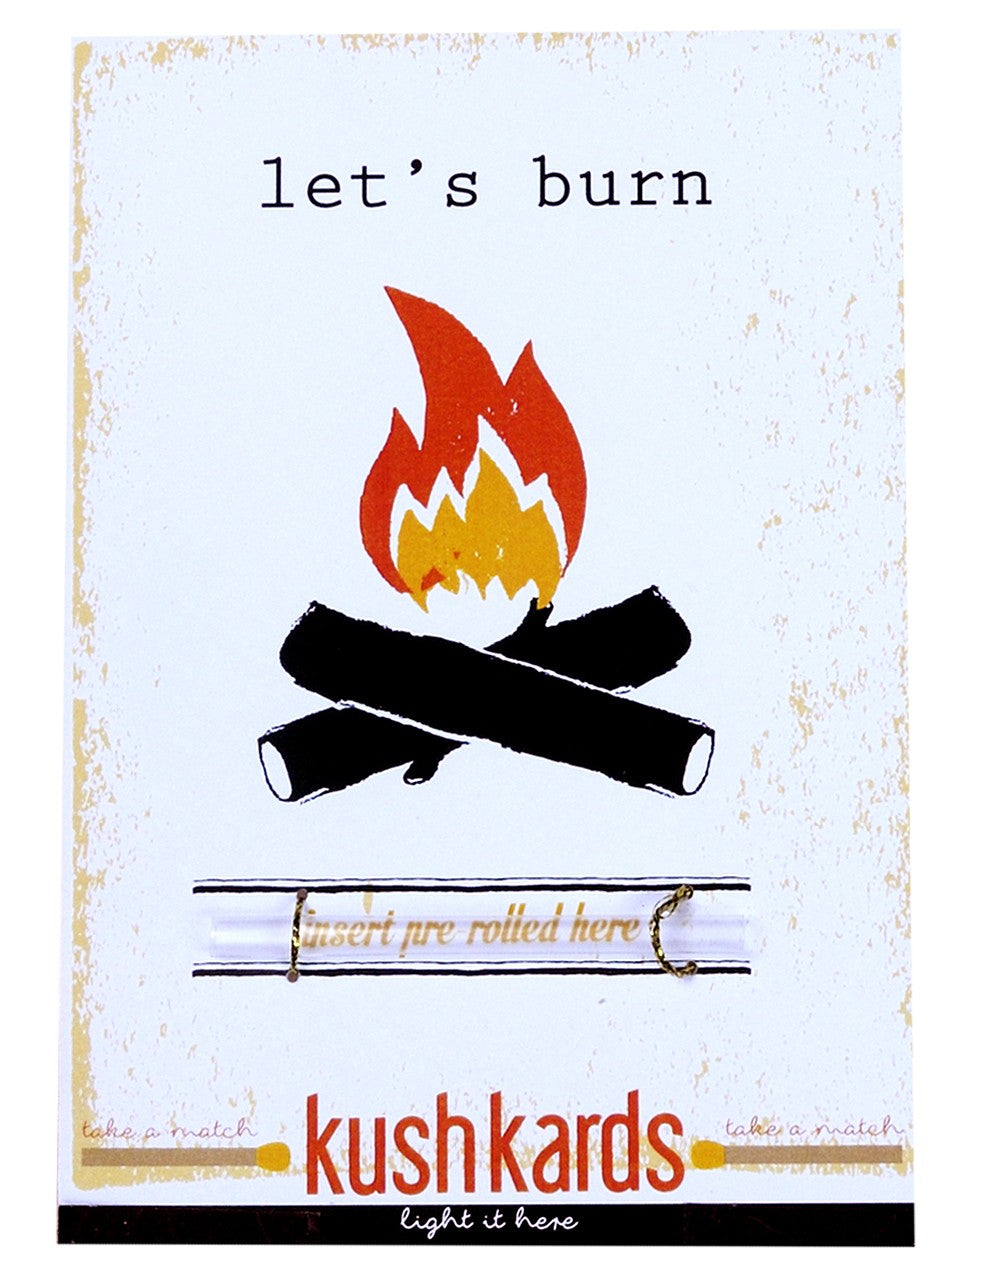 KUSHKARDS JUST ADD A PRE-ROLL GREETING CARD - LET'S BURN